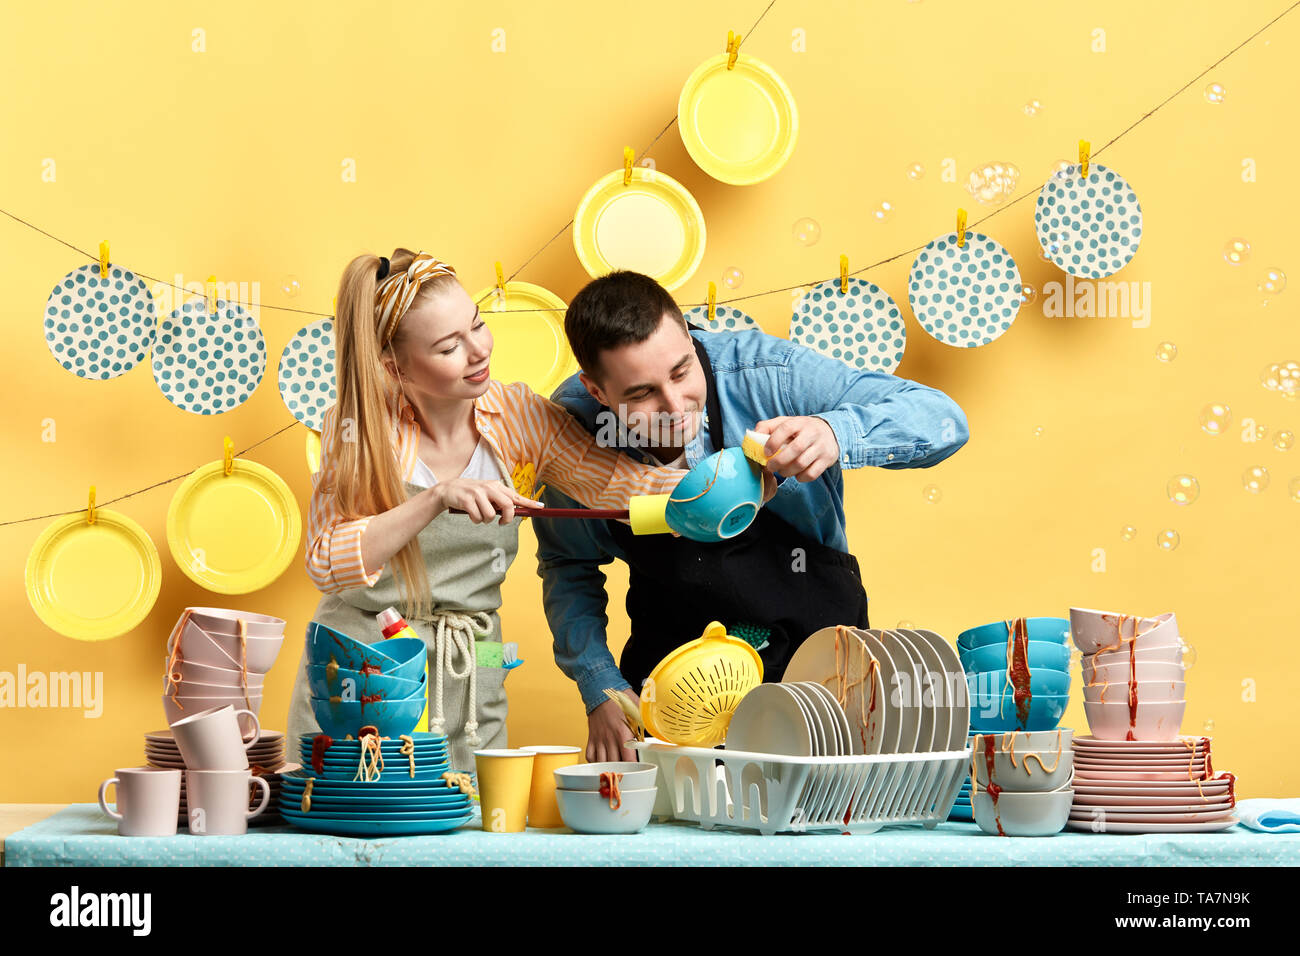 curious man and woman looking for sports, dust in the kitchenwear in the kitchen with yellow wall. close up photo Stock Photo